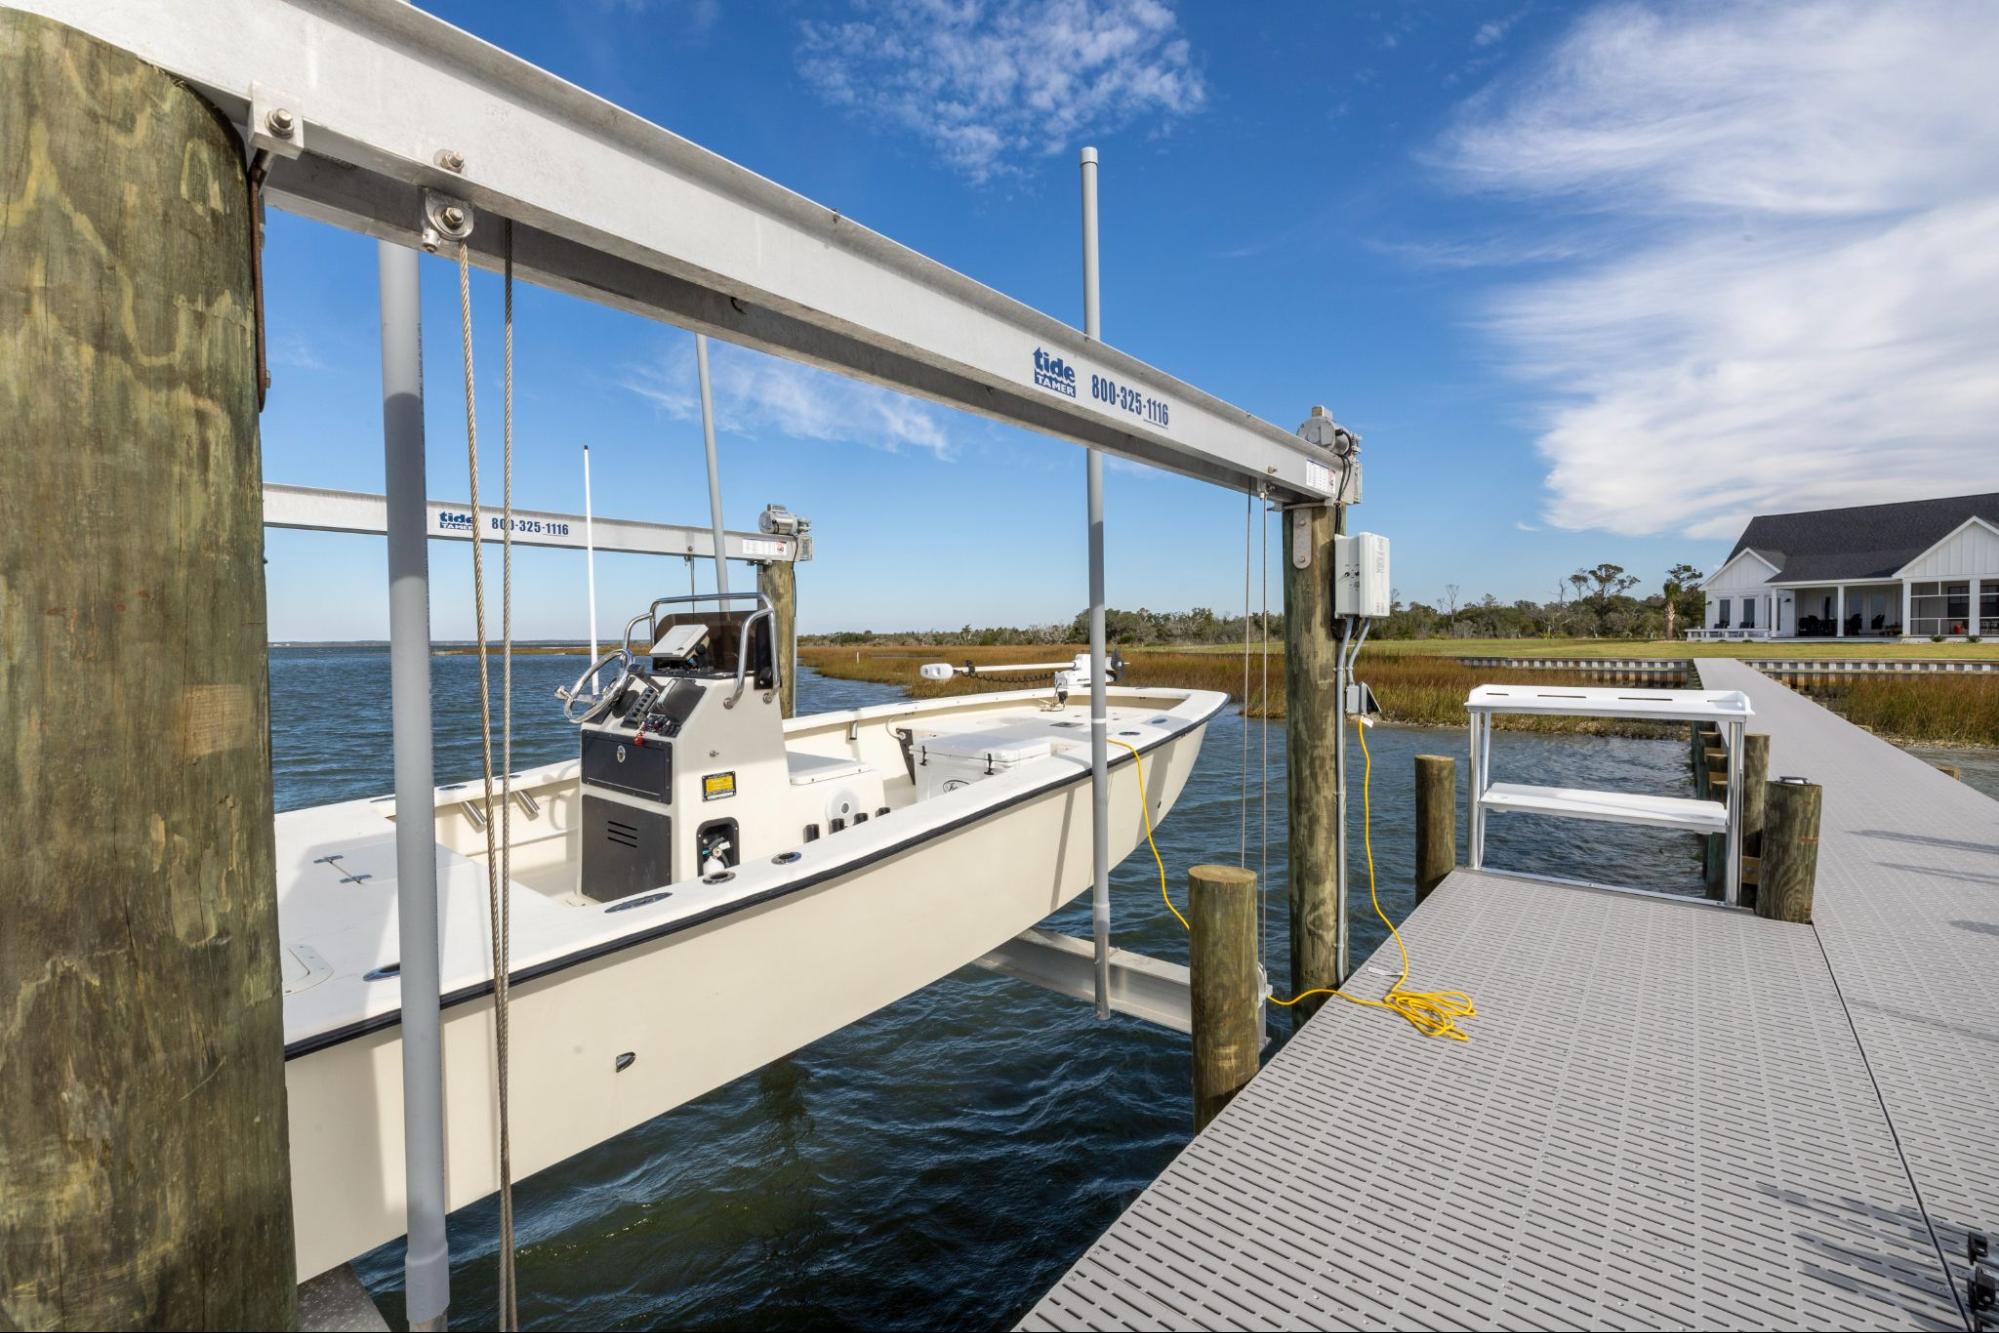 This picture depicts a boat raised above water by a boat lift that is attached to a long, gray dock. The dock meets a front lawn with a white house. 